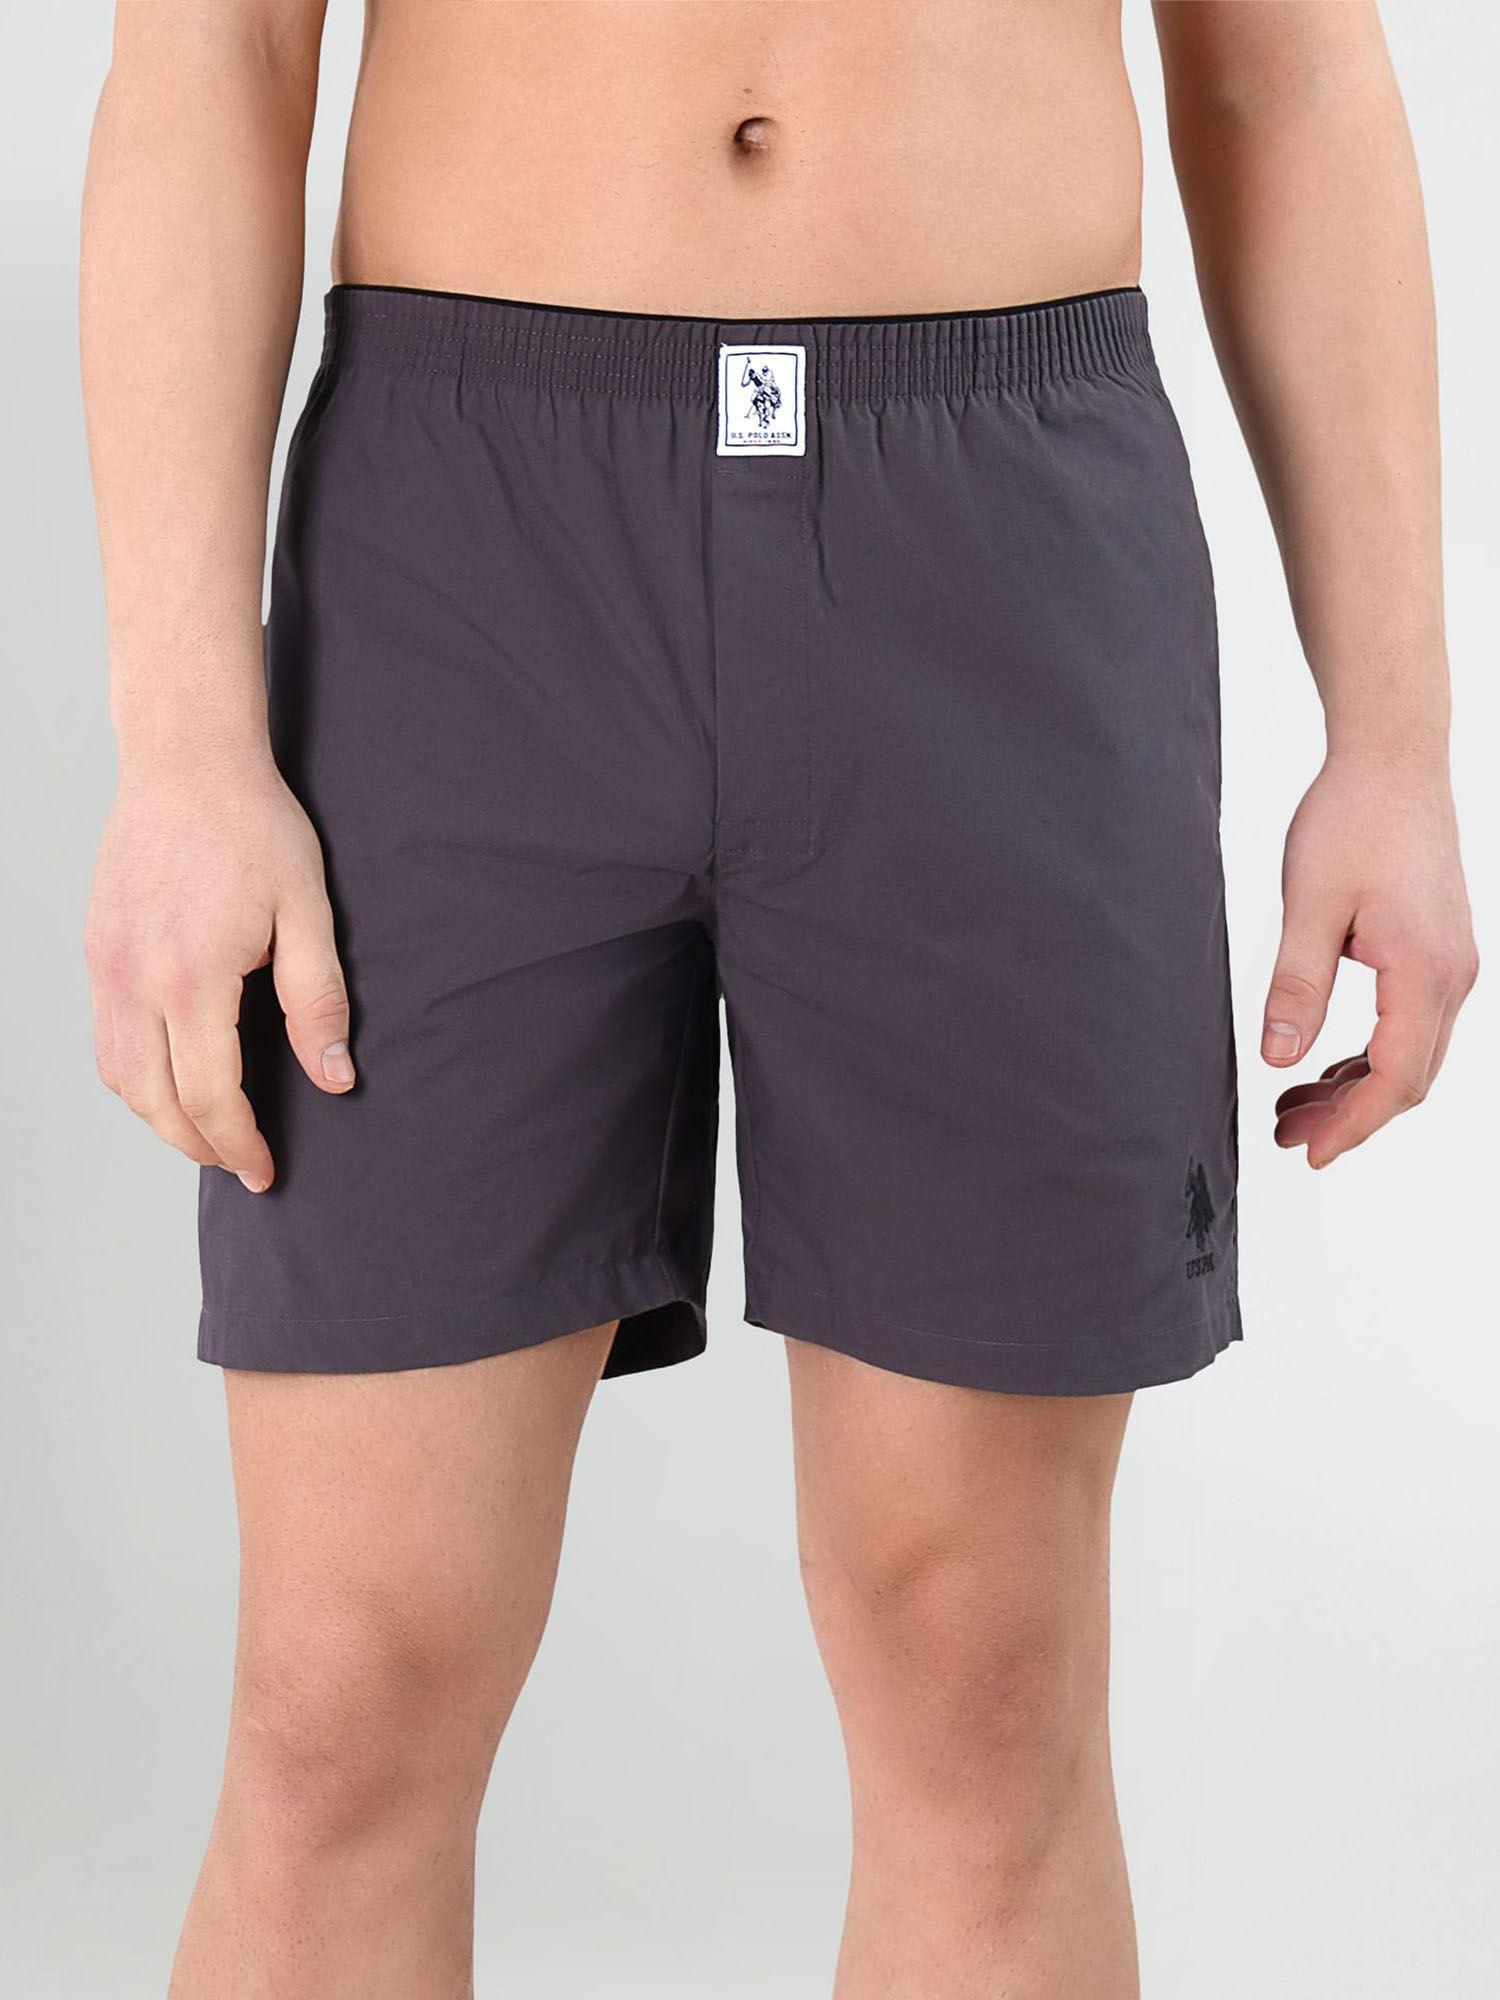 solid pure cotton i108 boxers grey